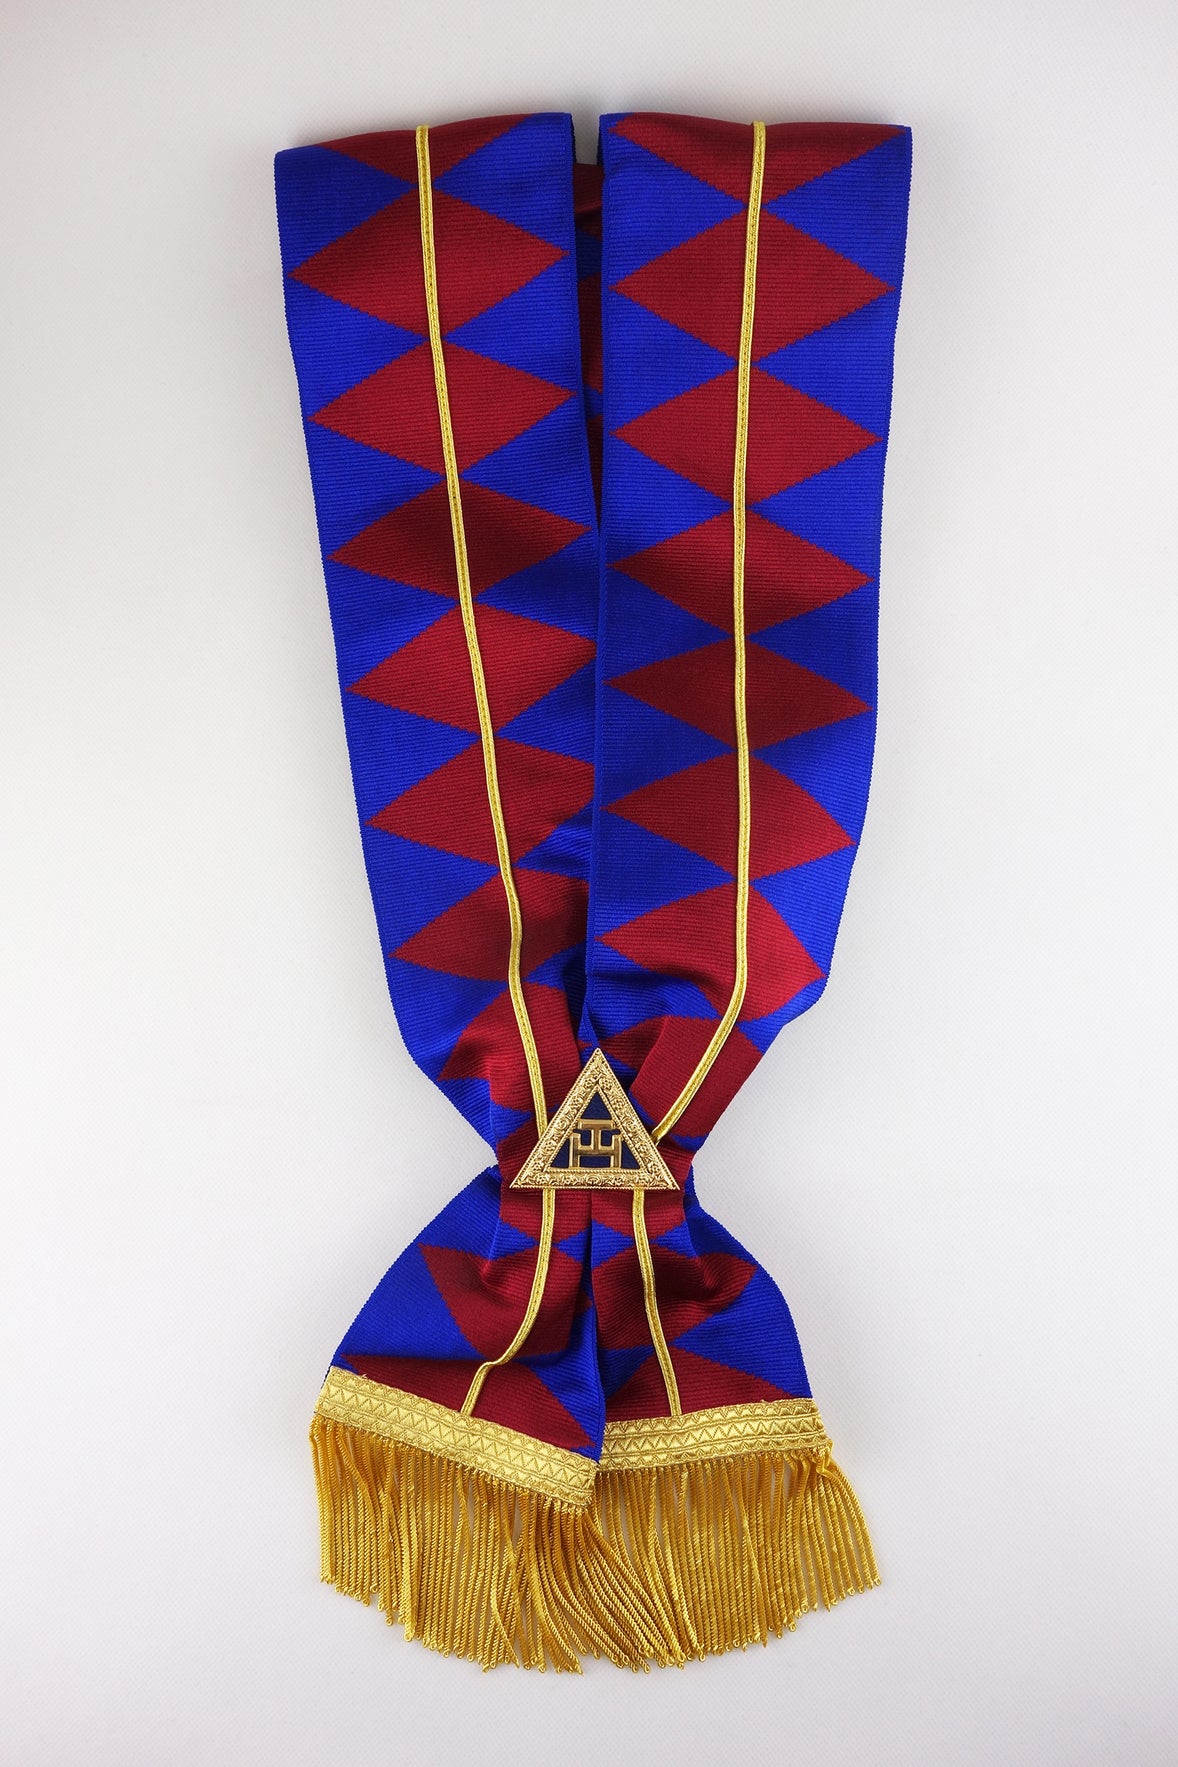 Grand Chapter Officer Sash, Victoria